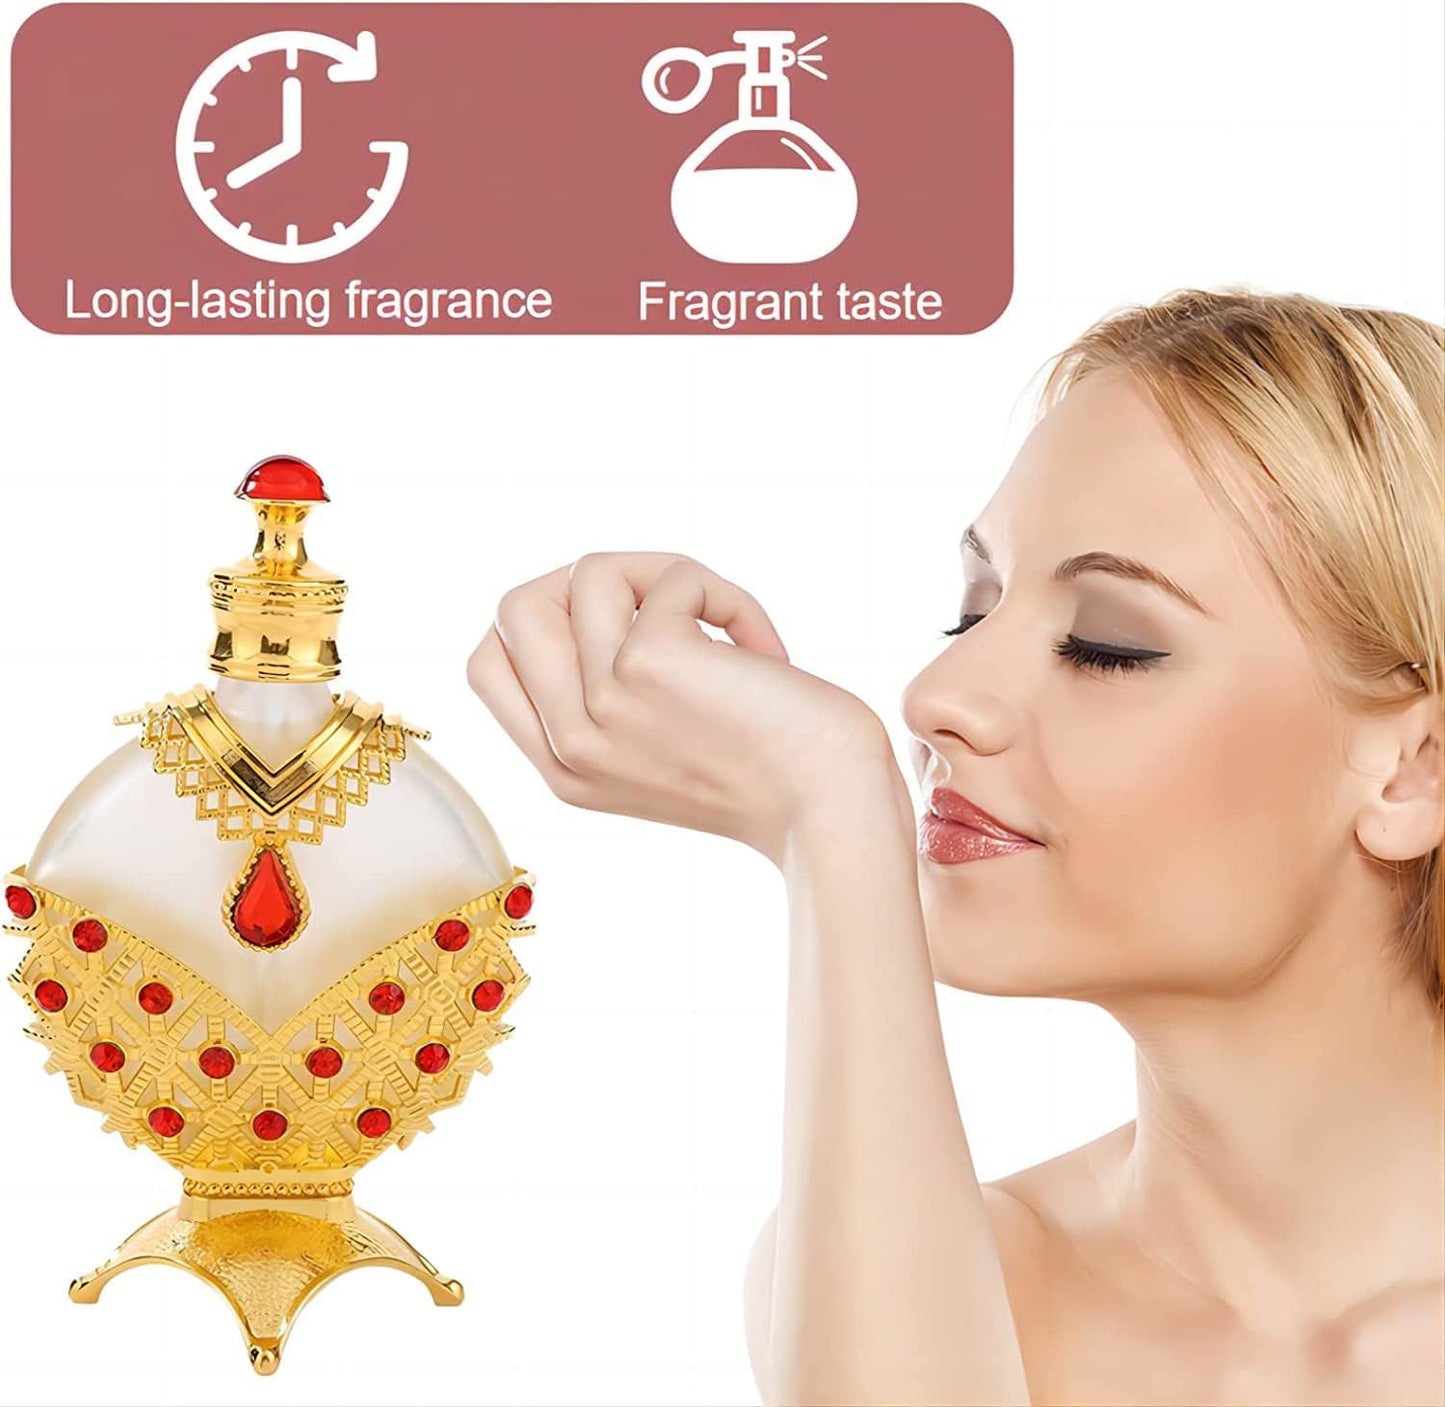 Concentrated Perfume Oil, Gold Perfume Oil, Arabian Perfume for Women